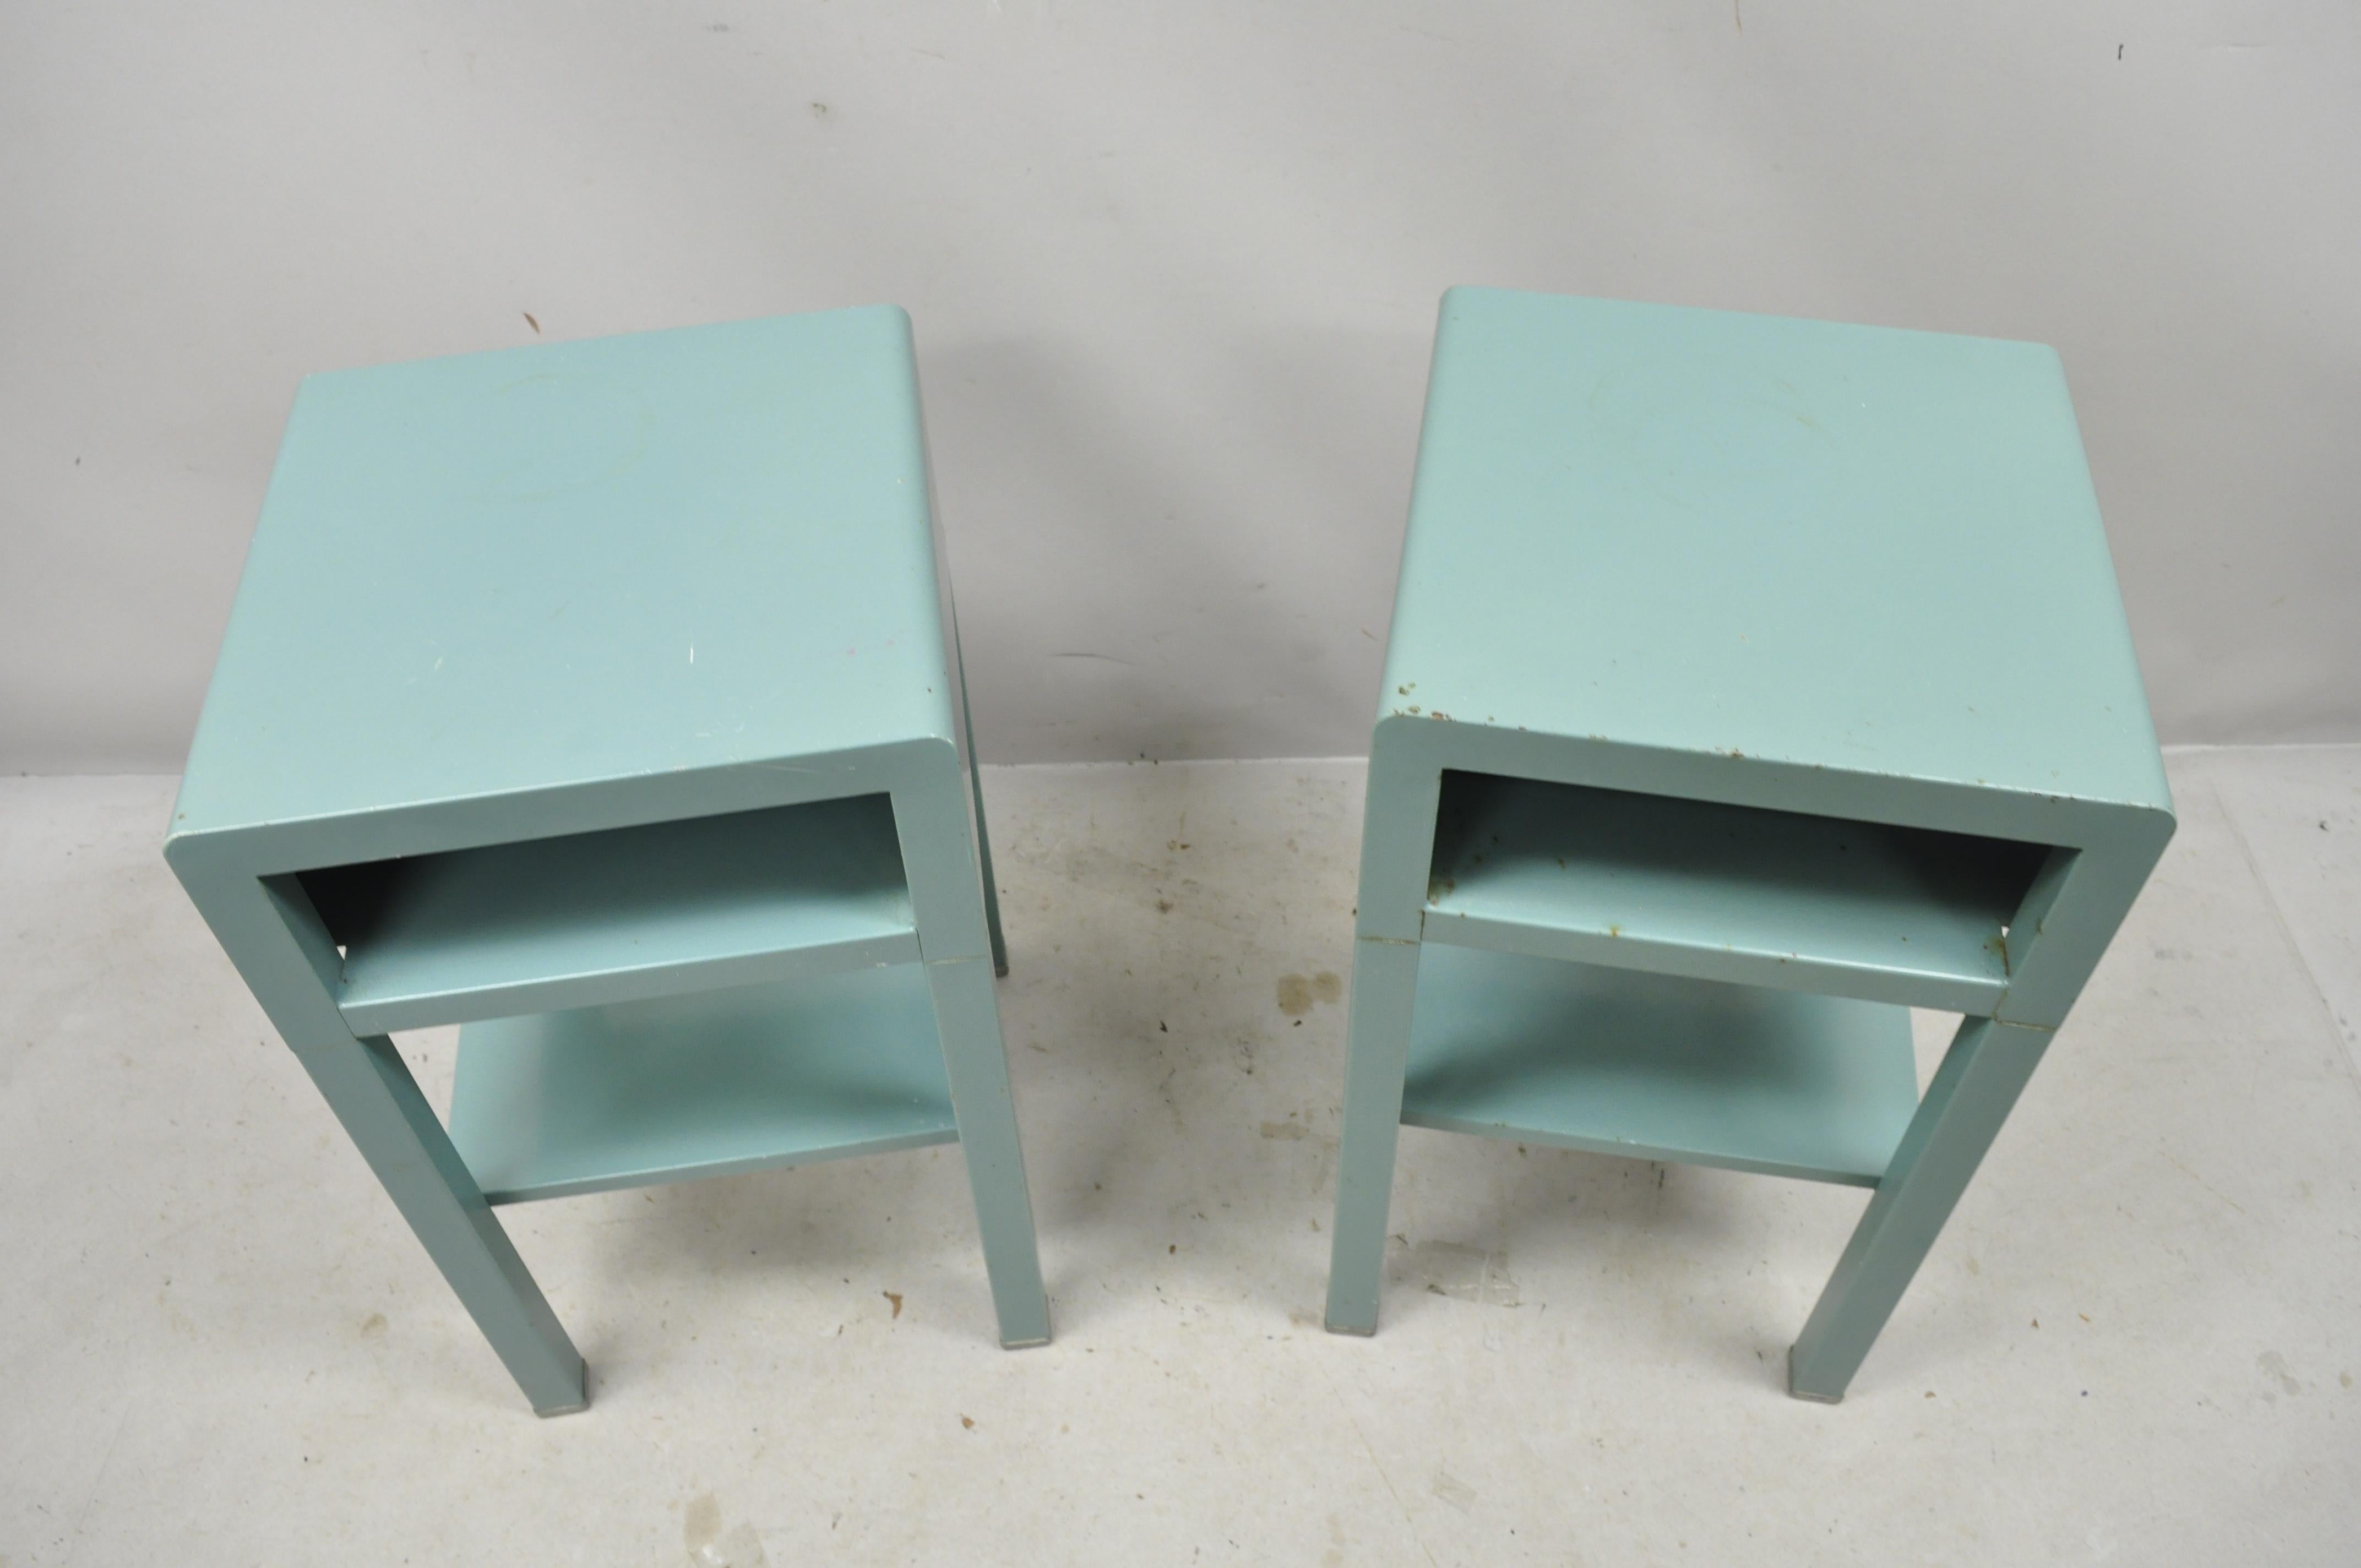 North American Bel Geddes for Simmons Vtg Industrial Modern Art Deco Nightstand Tables, a Pair